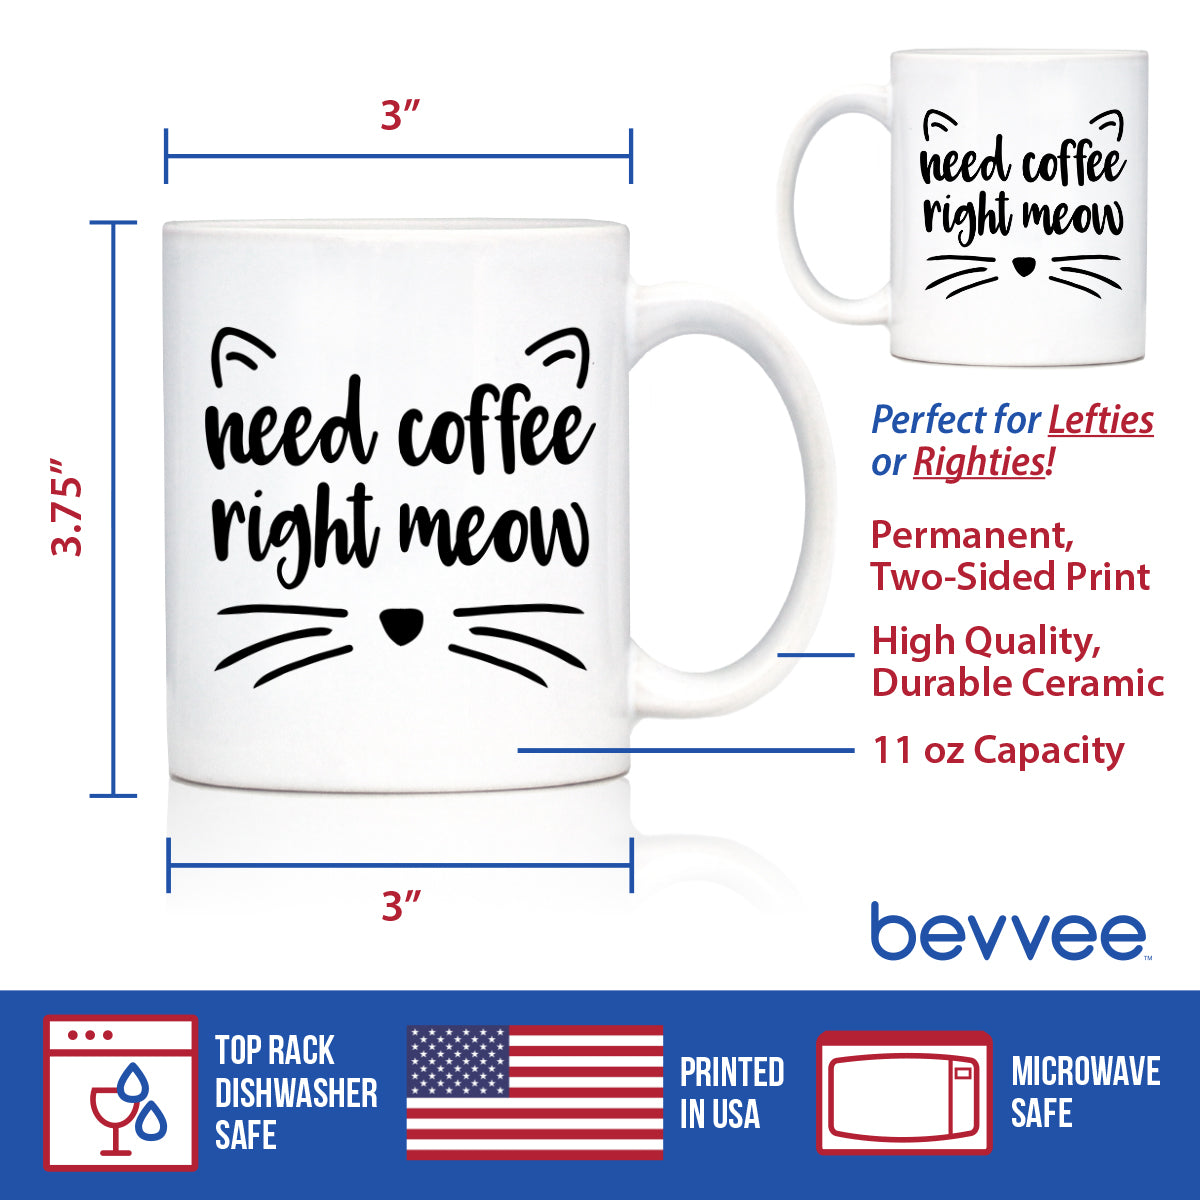 Need Coffee Right Meow - Funny Cat Themed Coffee Mug Gifts &amp; Decor